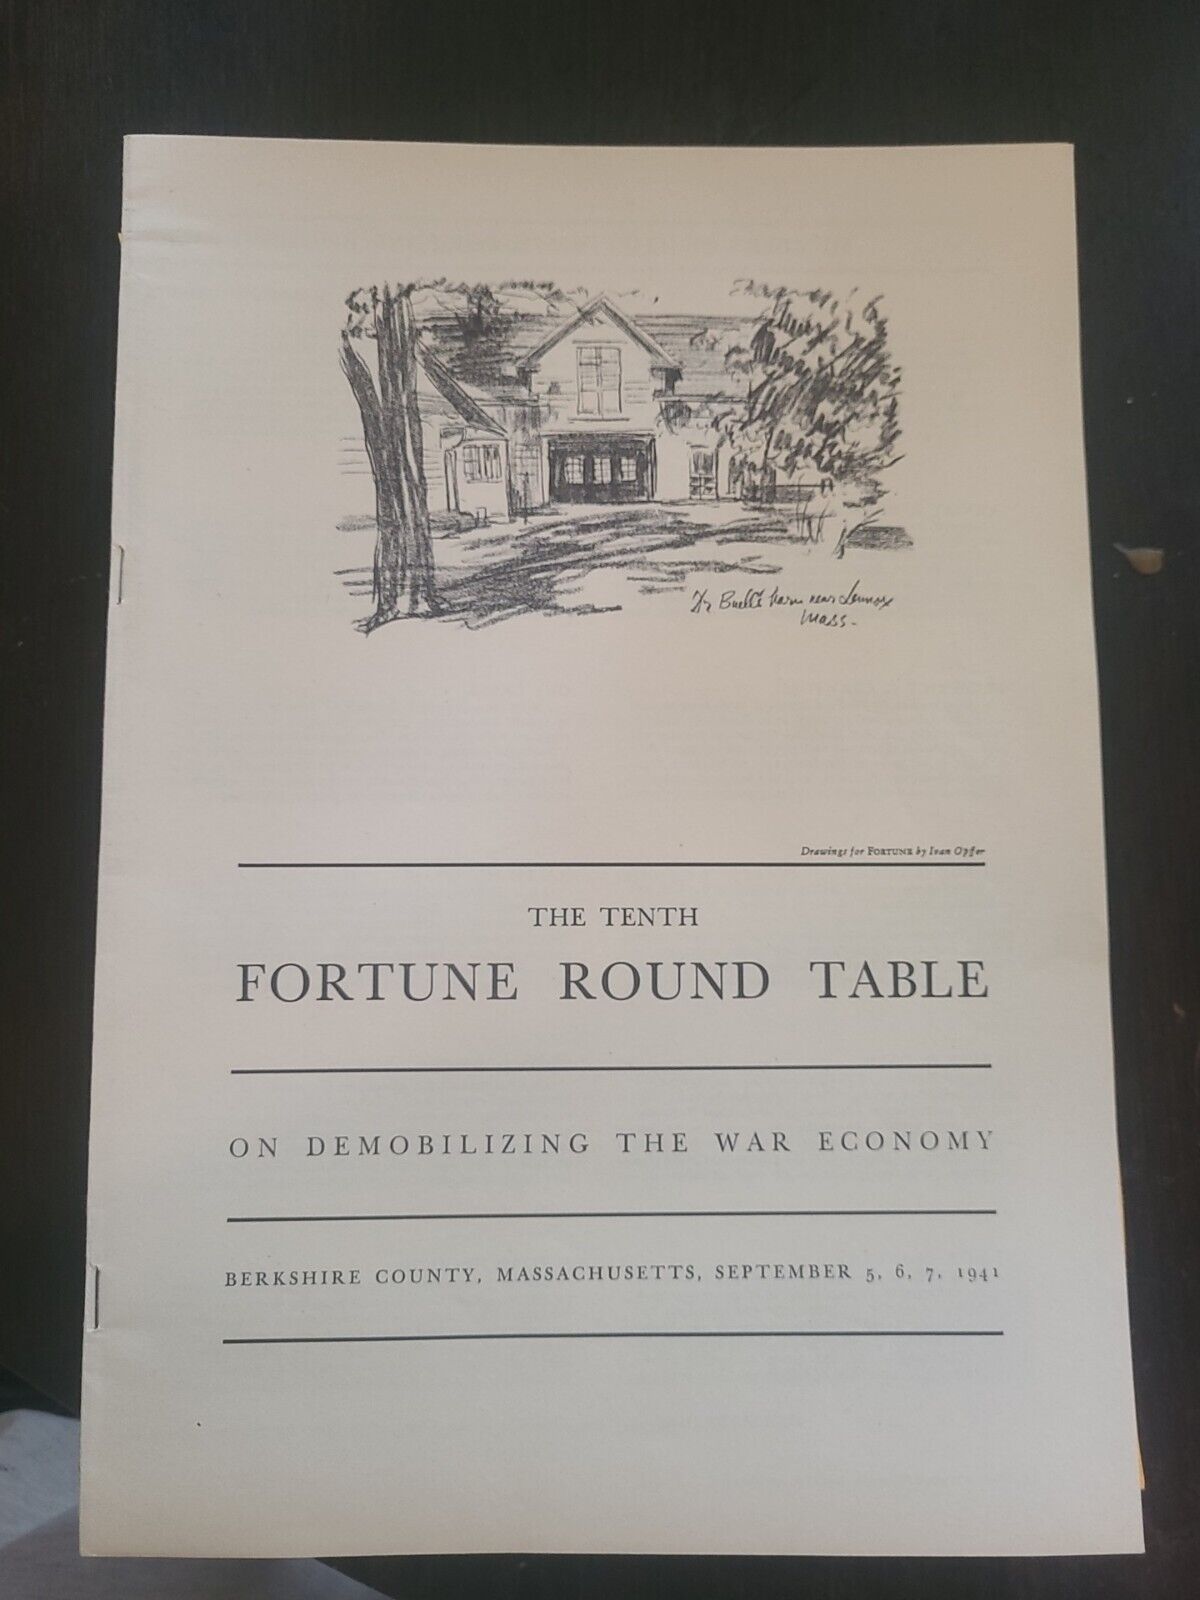 1941 WWII The Tenth Fortune Round Table Featuring Demobilizing the War Economy